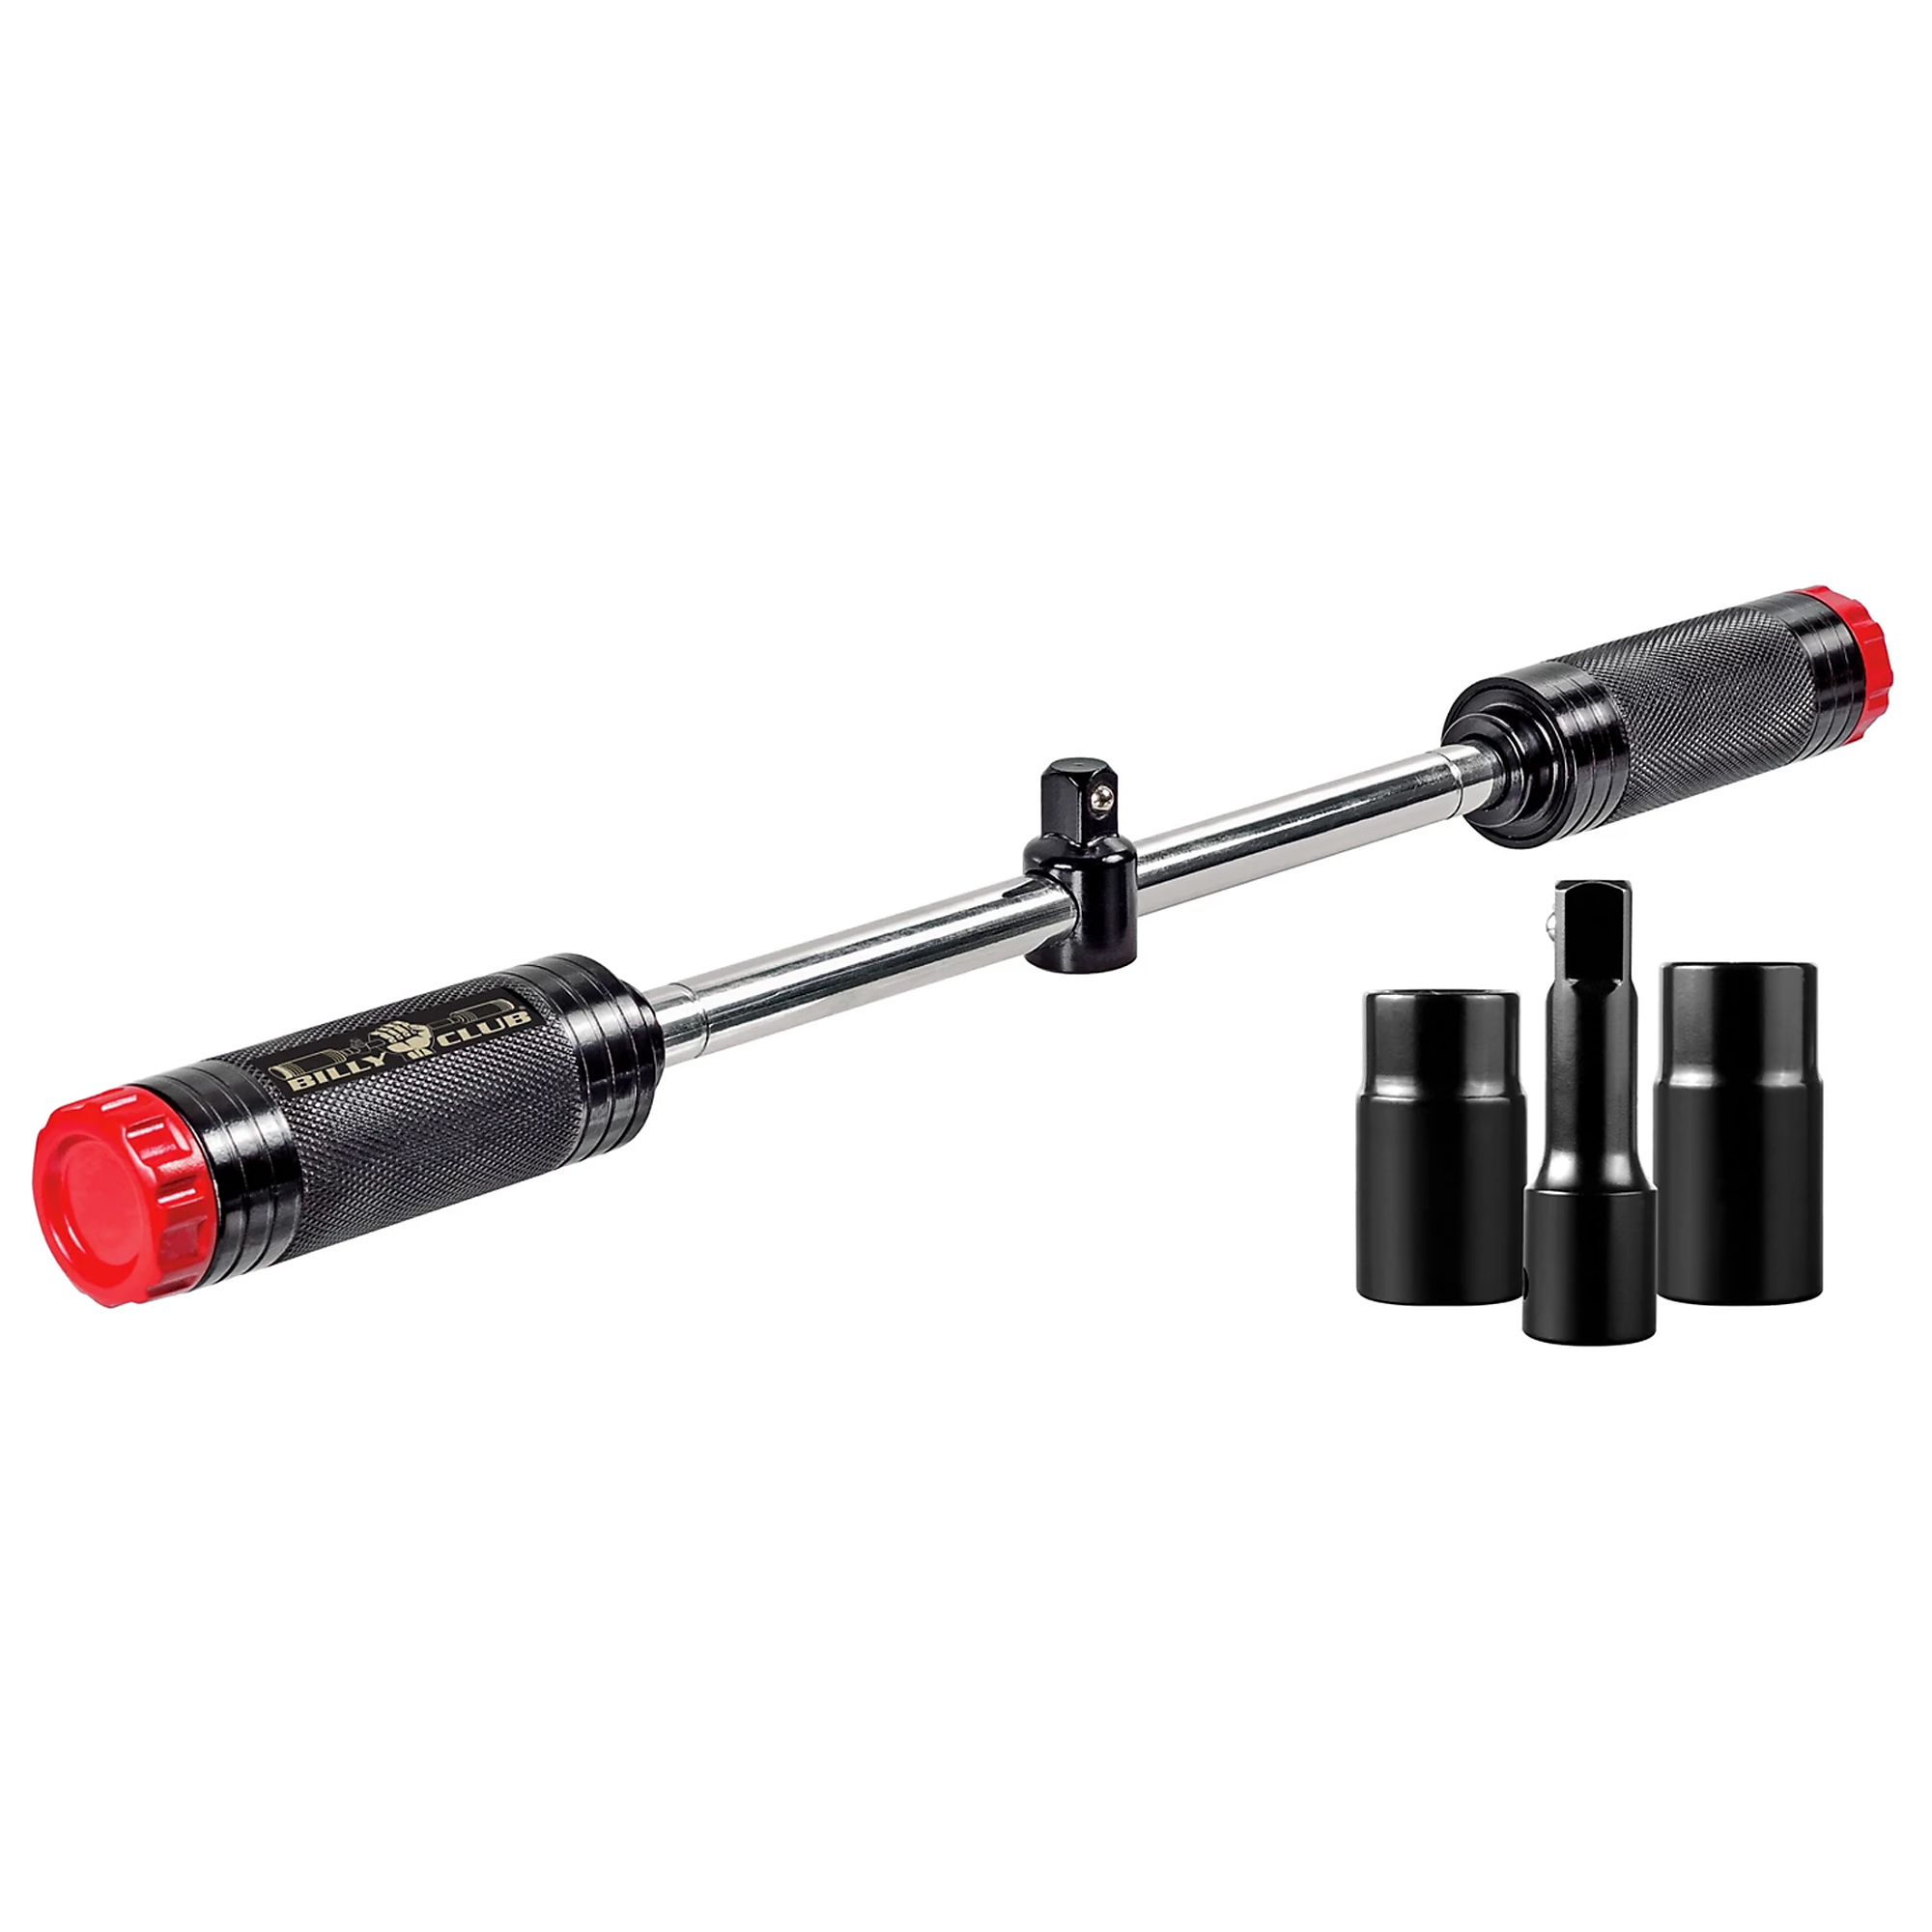 Powerbuilt, Billy Club Universal Lug Wrench SAE/mm Gen-2, Length 20.75 in, Material Type Steel, Socket (qty.) 2, Model 642250